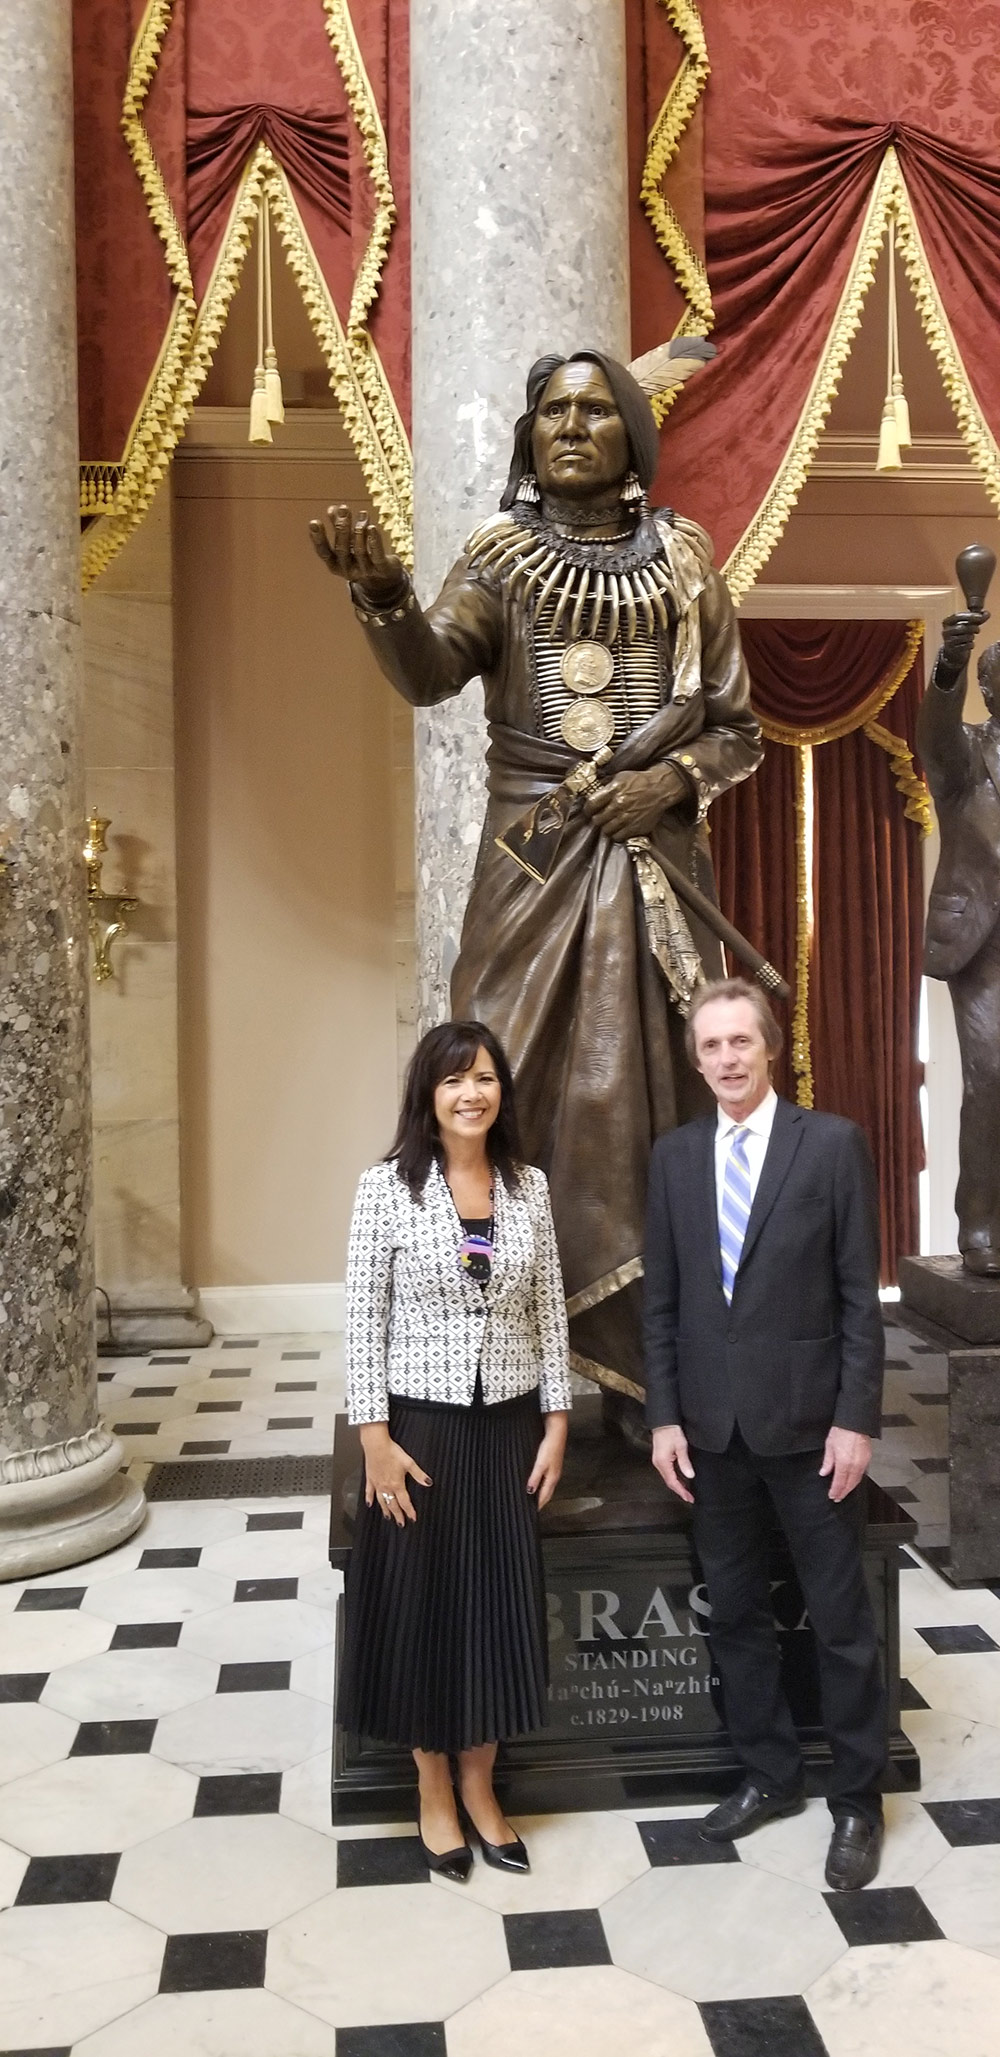 Professor Joe Starita attends the installation of a statue of Chief Standing Bear at the United States Capitol